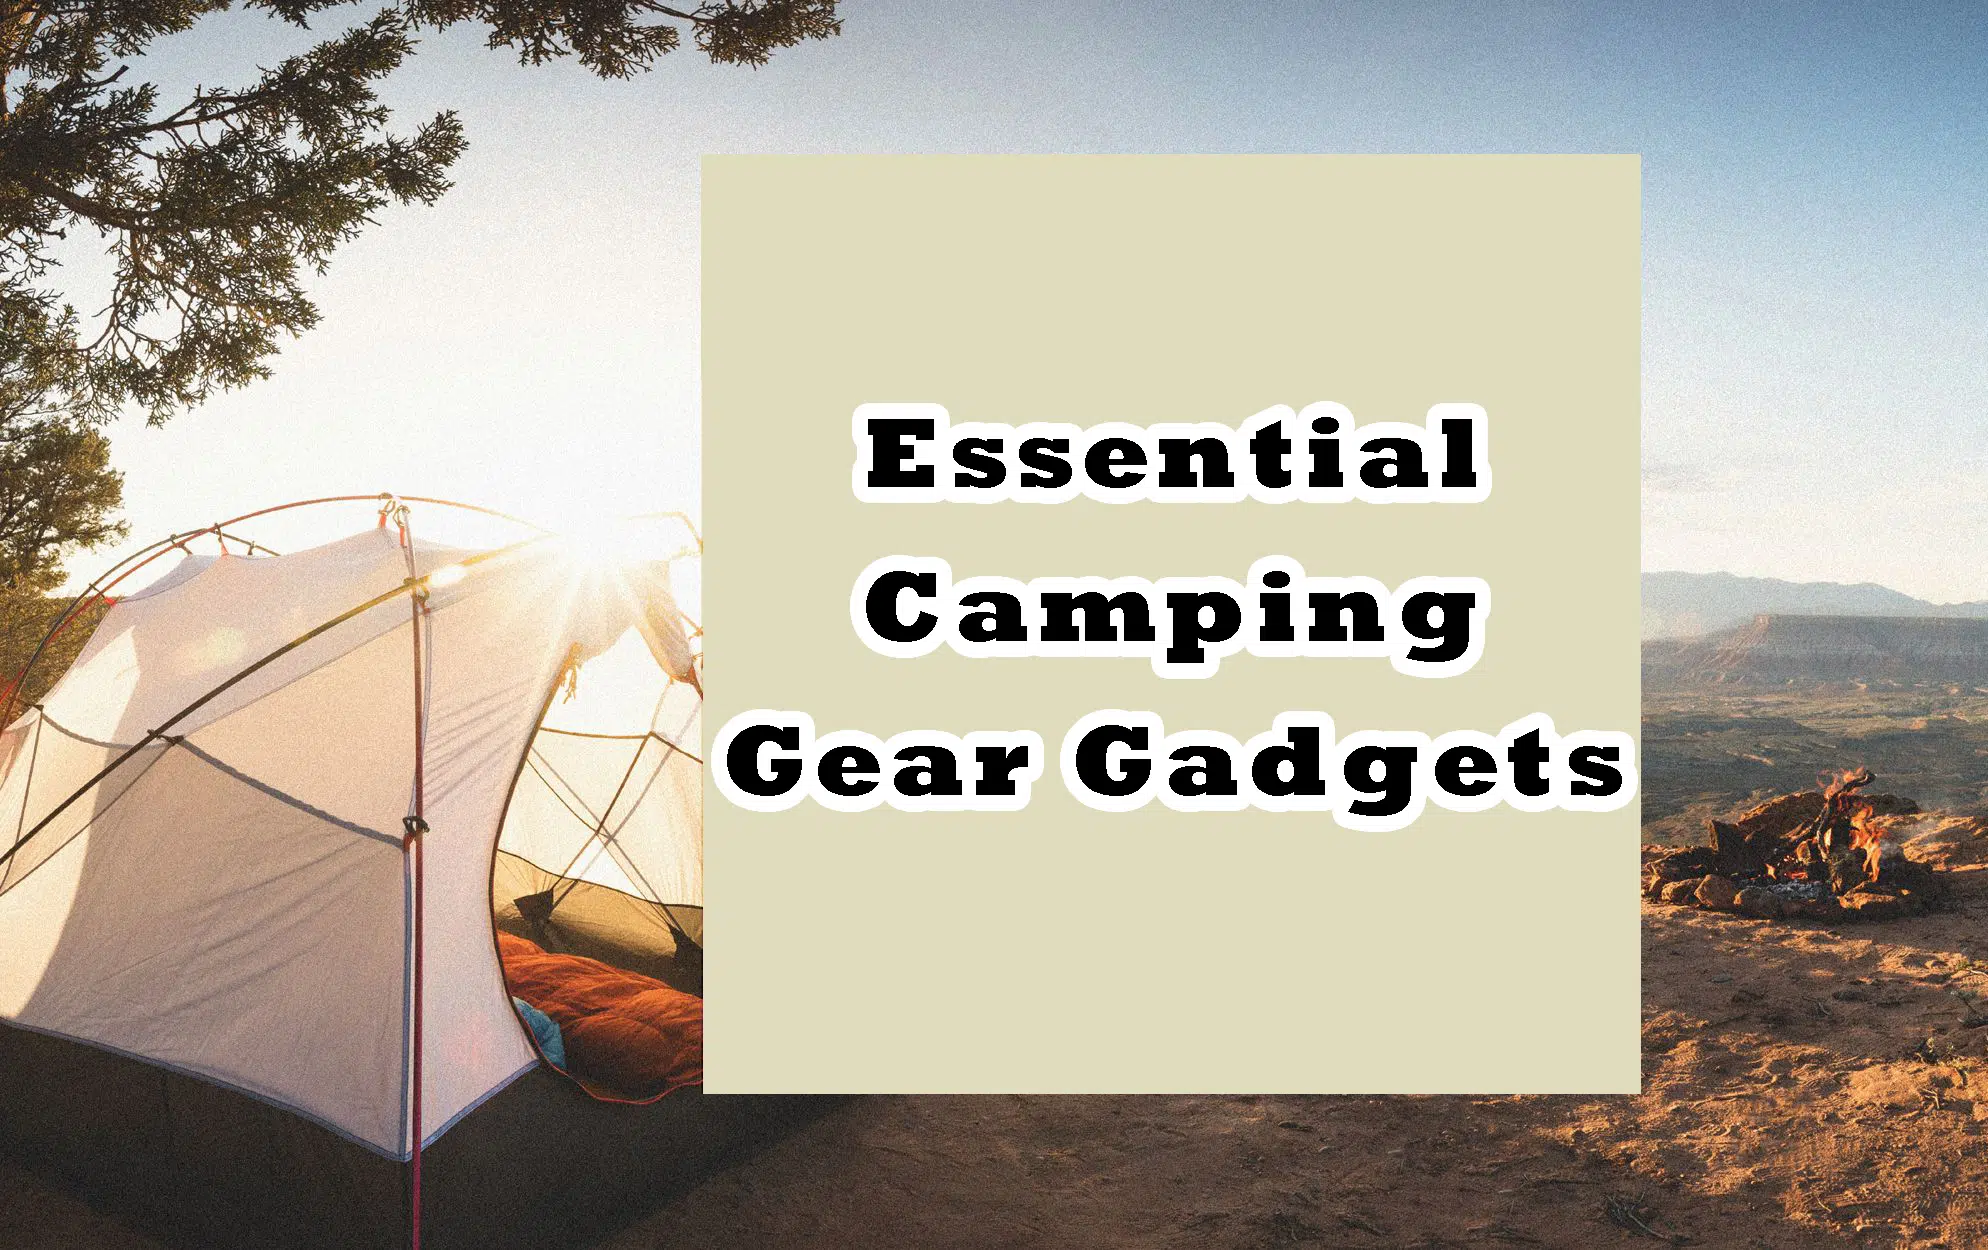 Essential Camping Gear Gadgets